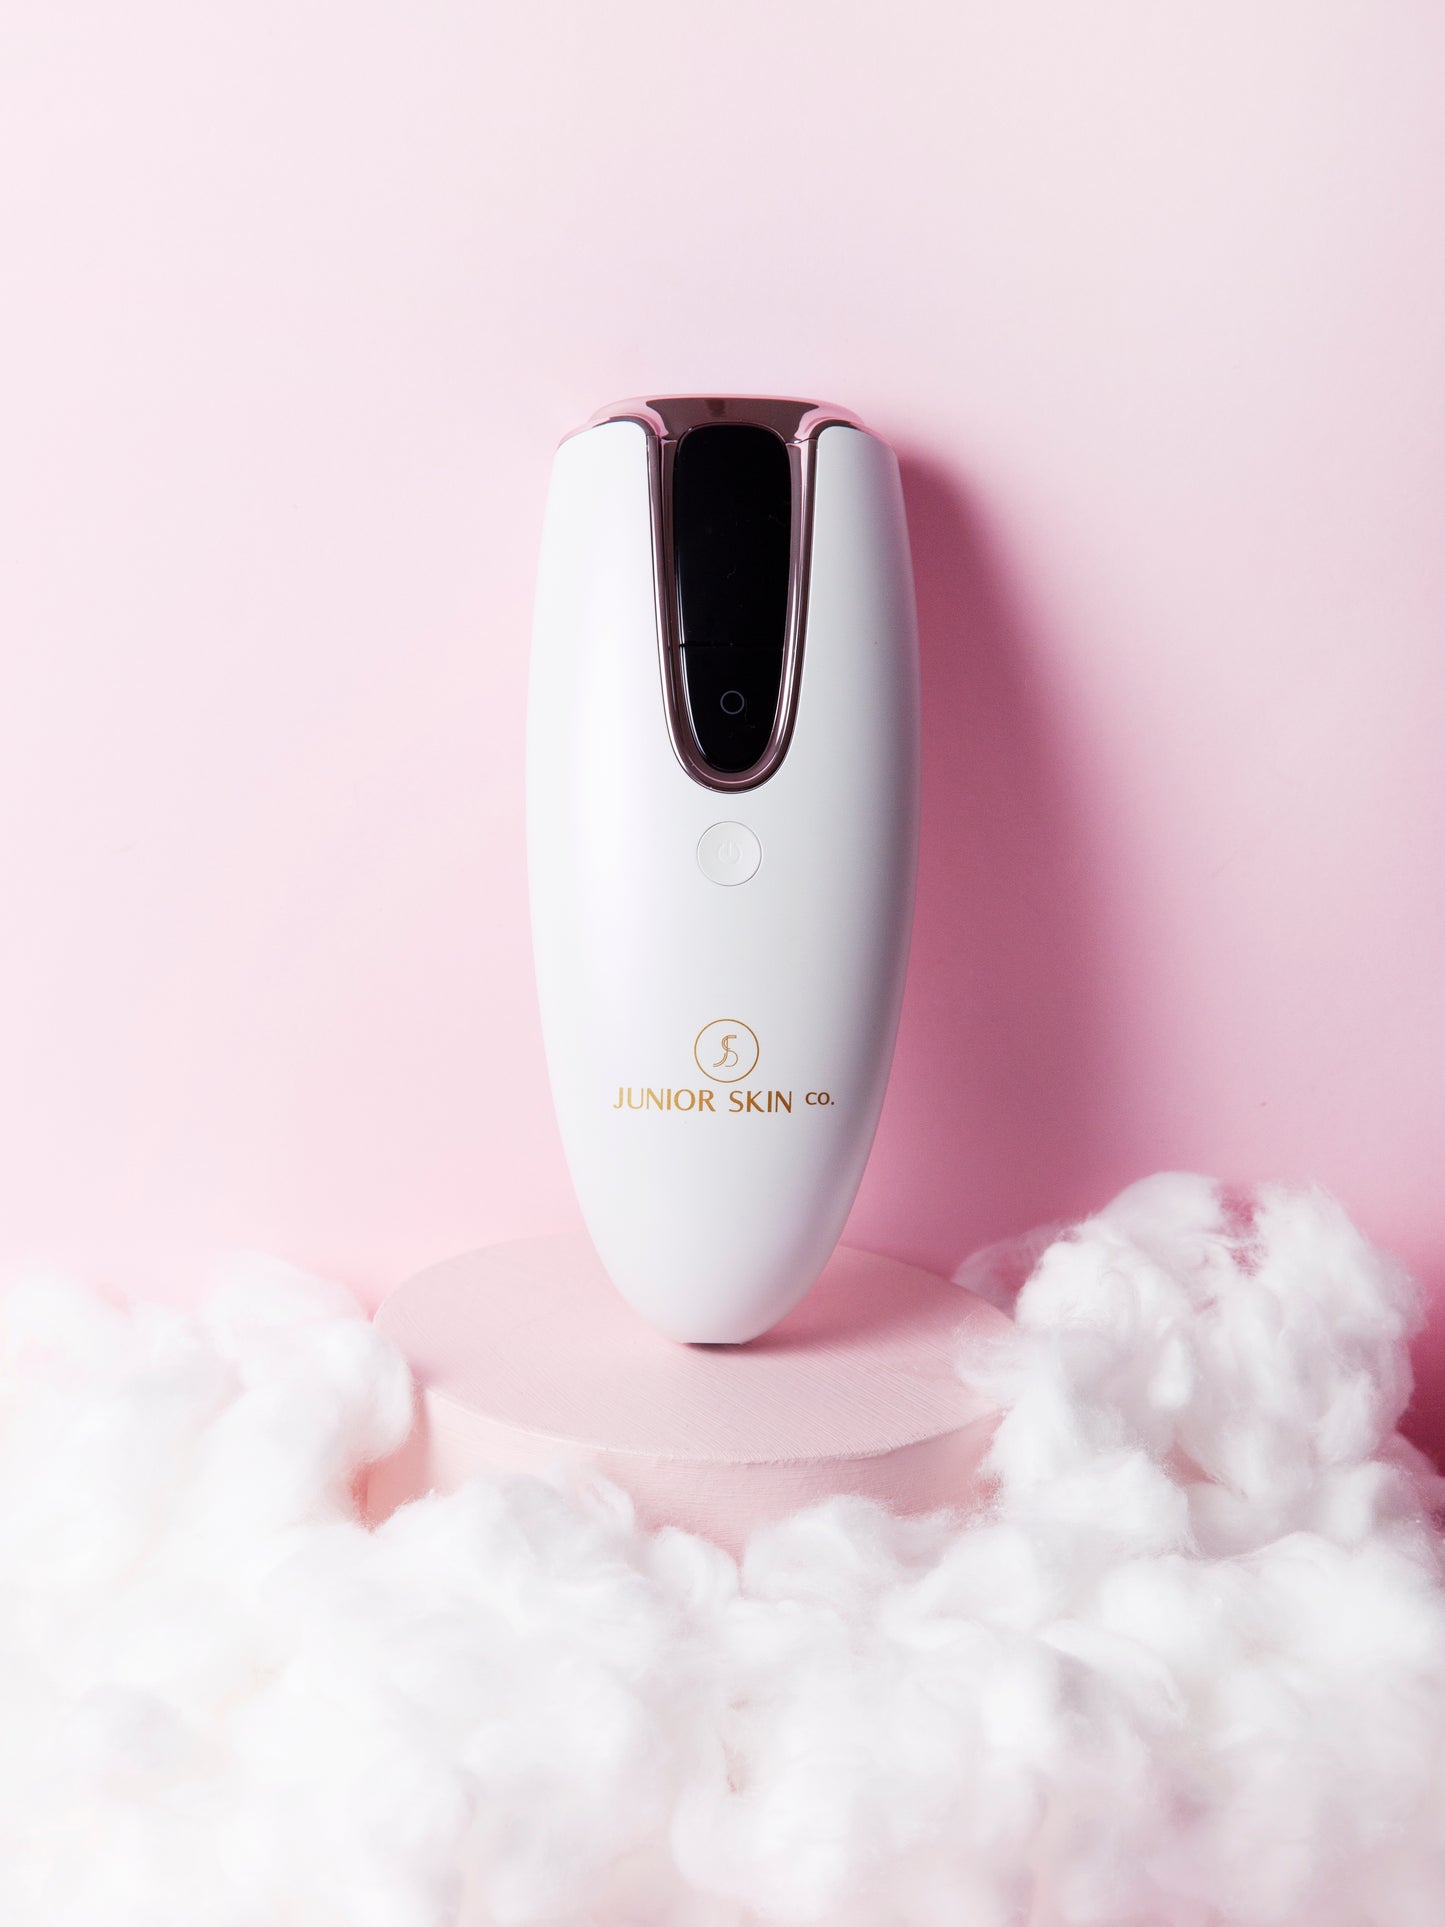 JuniorSkinCo Deluxe IPL Laser Hair Removal Device